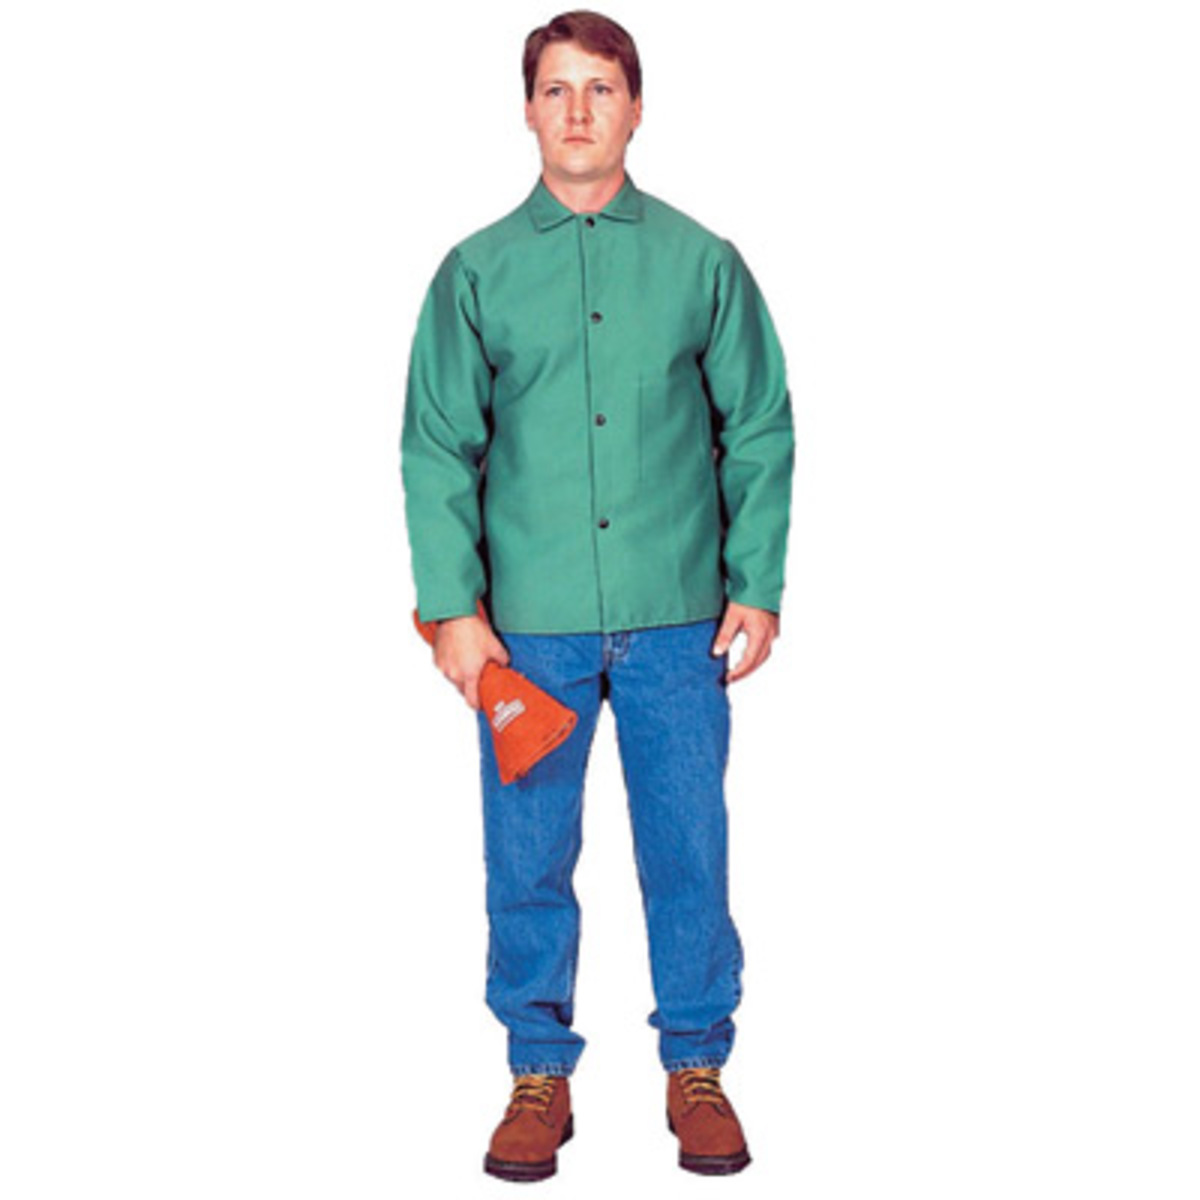 Stanco Safety Products™ Size 3X Tall Green Cotton Flame Resistant Welding Jacket With Snap Closure